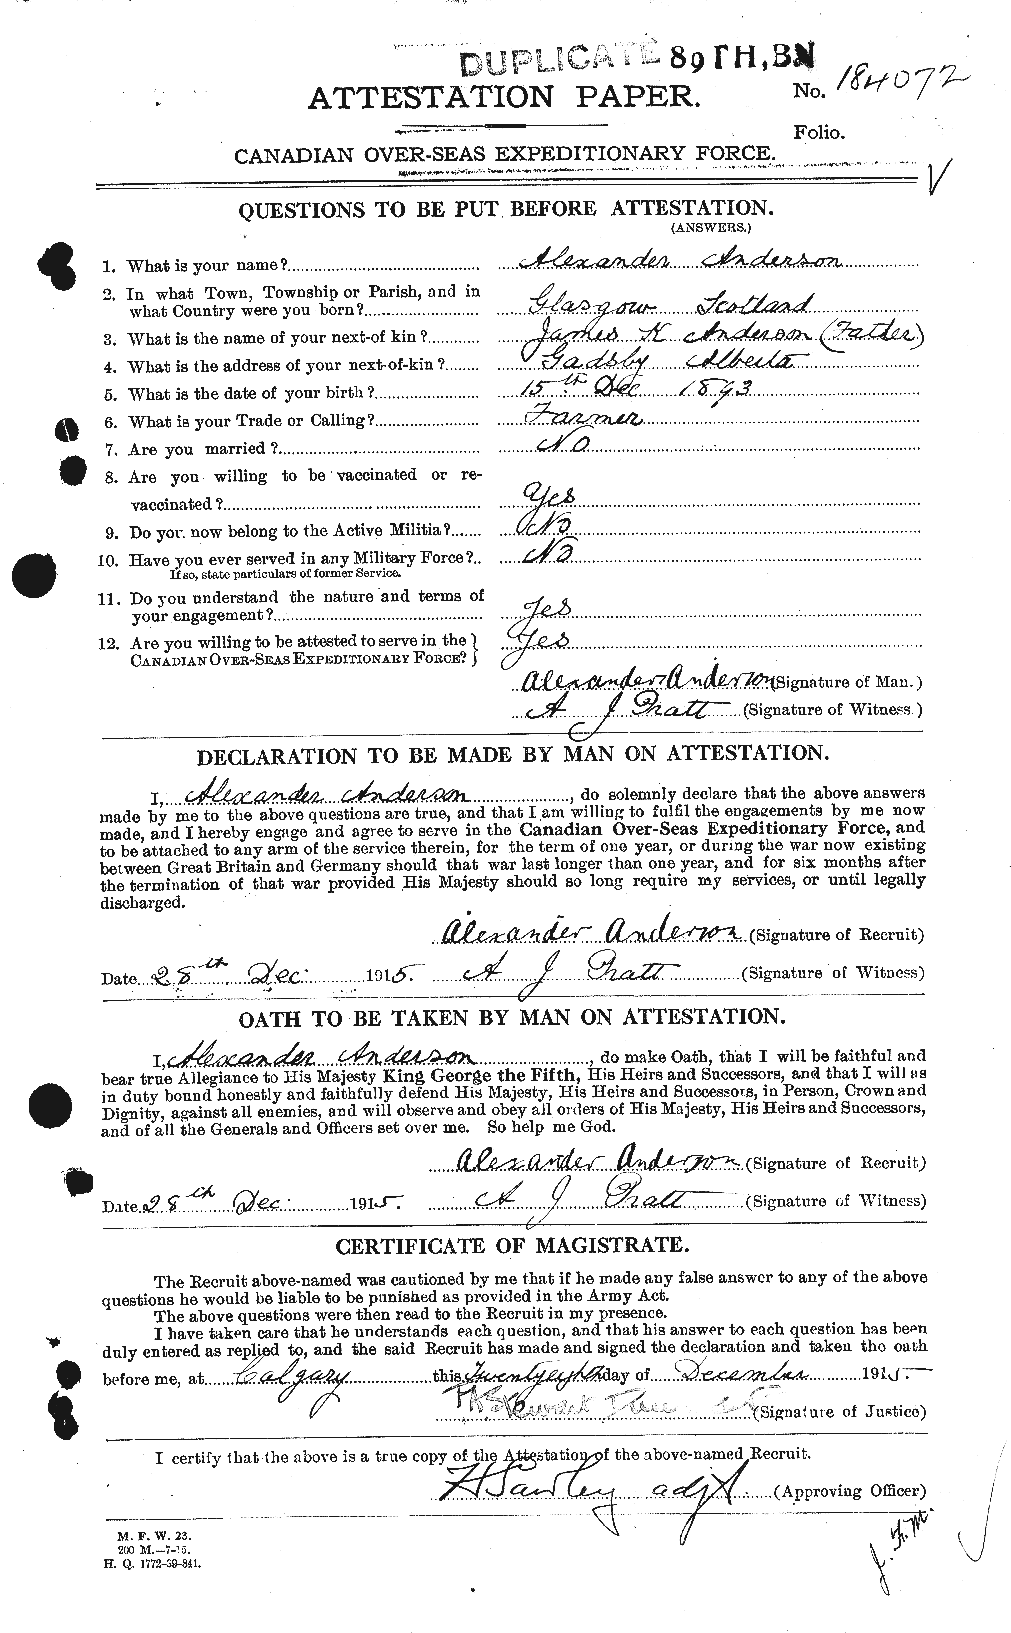 Personnel Records of the First World War - CEF 209510a